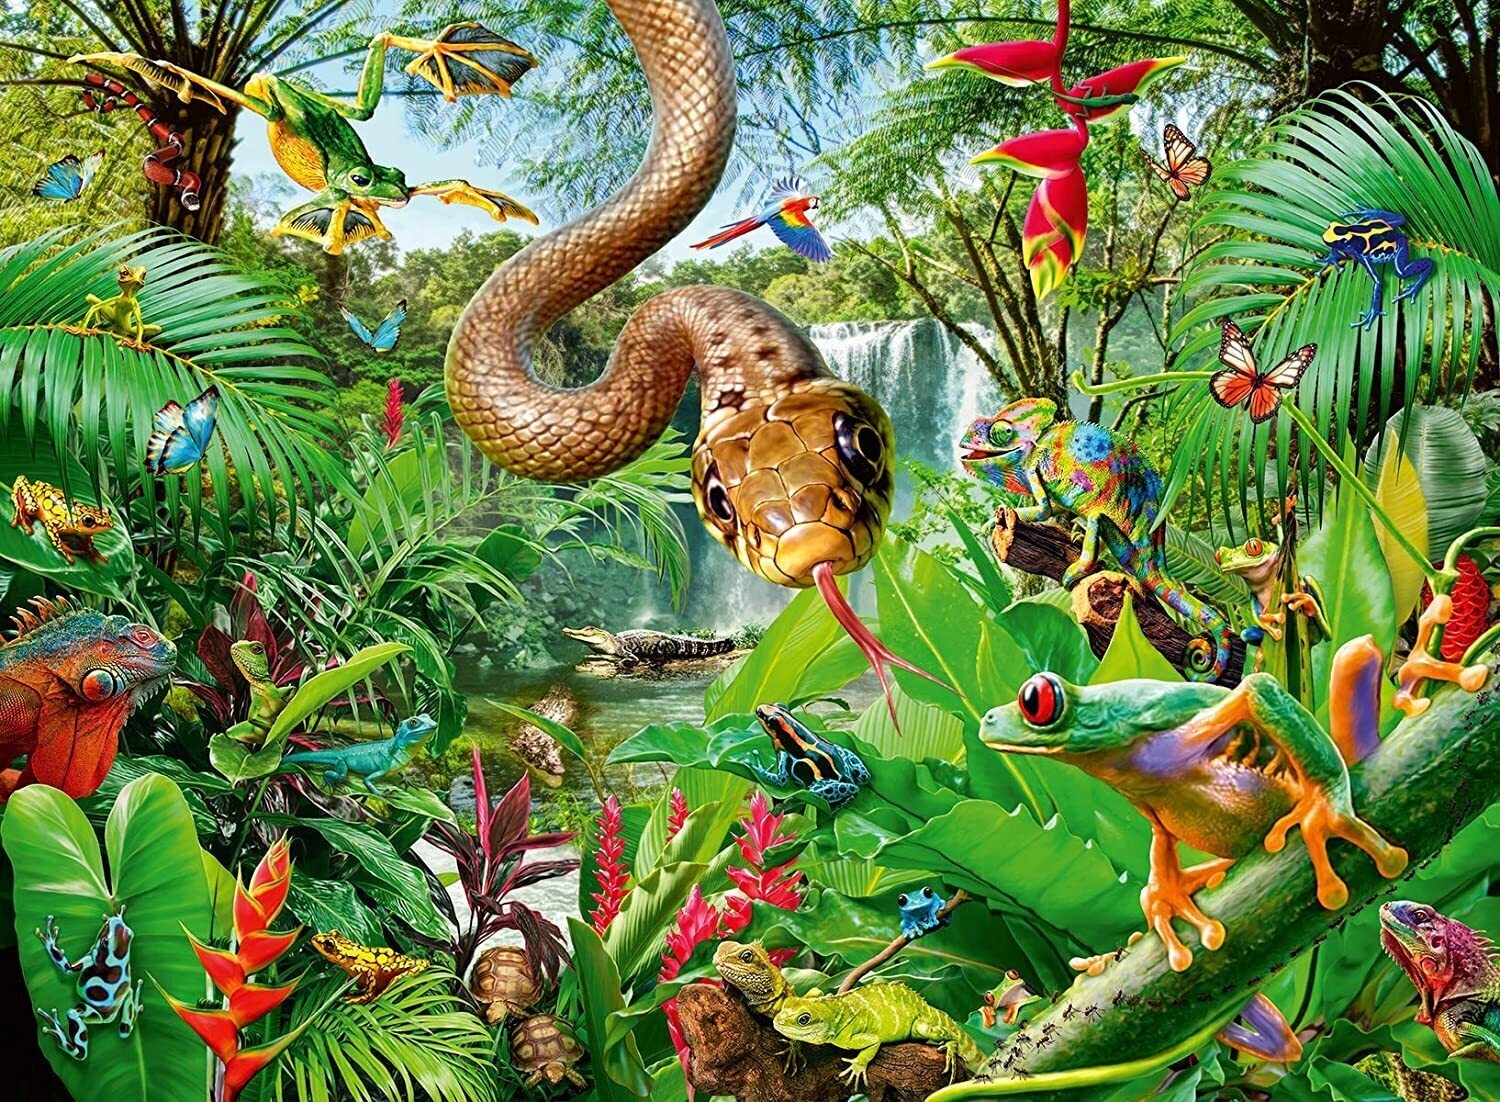 Ravensburger Reptile Resort 300pc Jigsaw Puzzle | Best Range of Animal  Jigsaw Puzzles for Kids